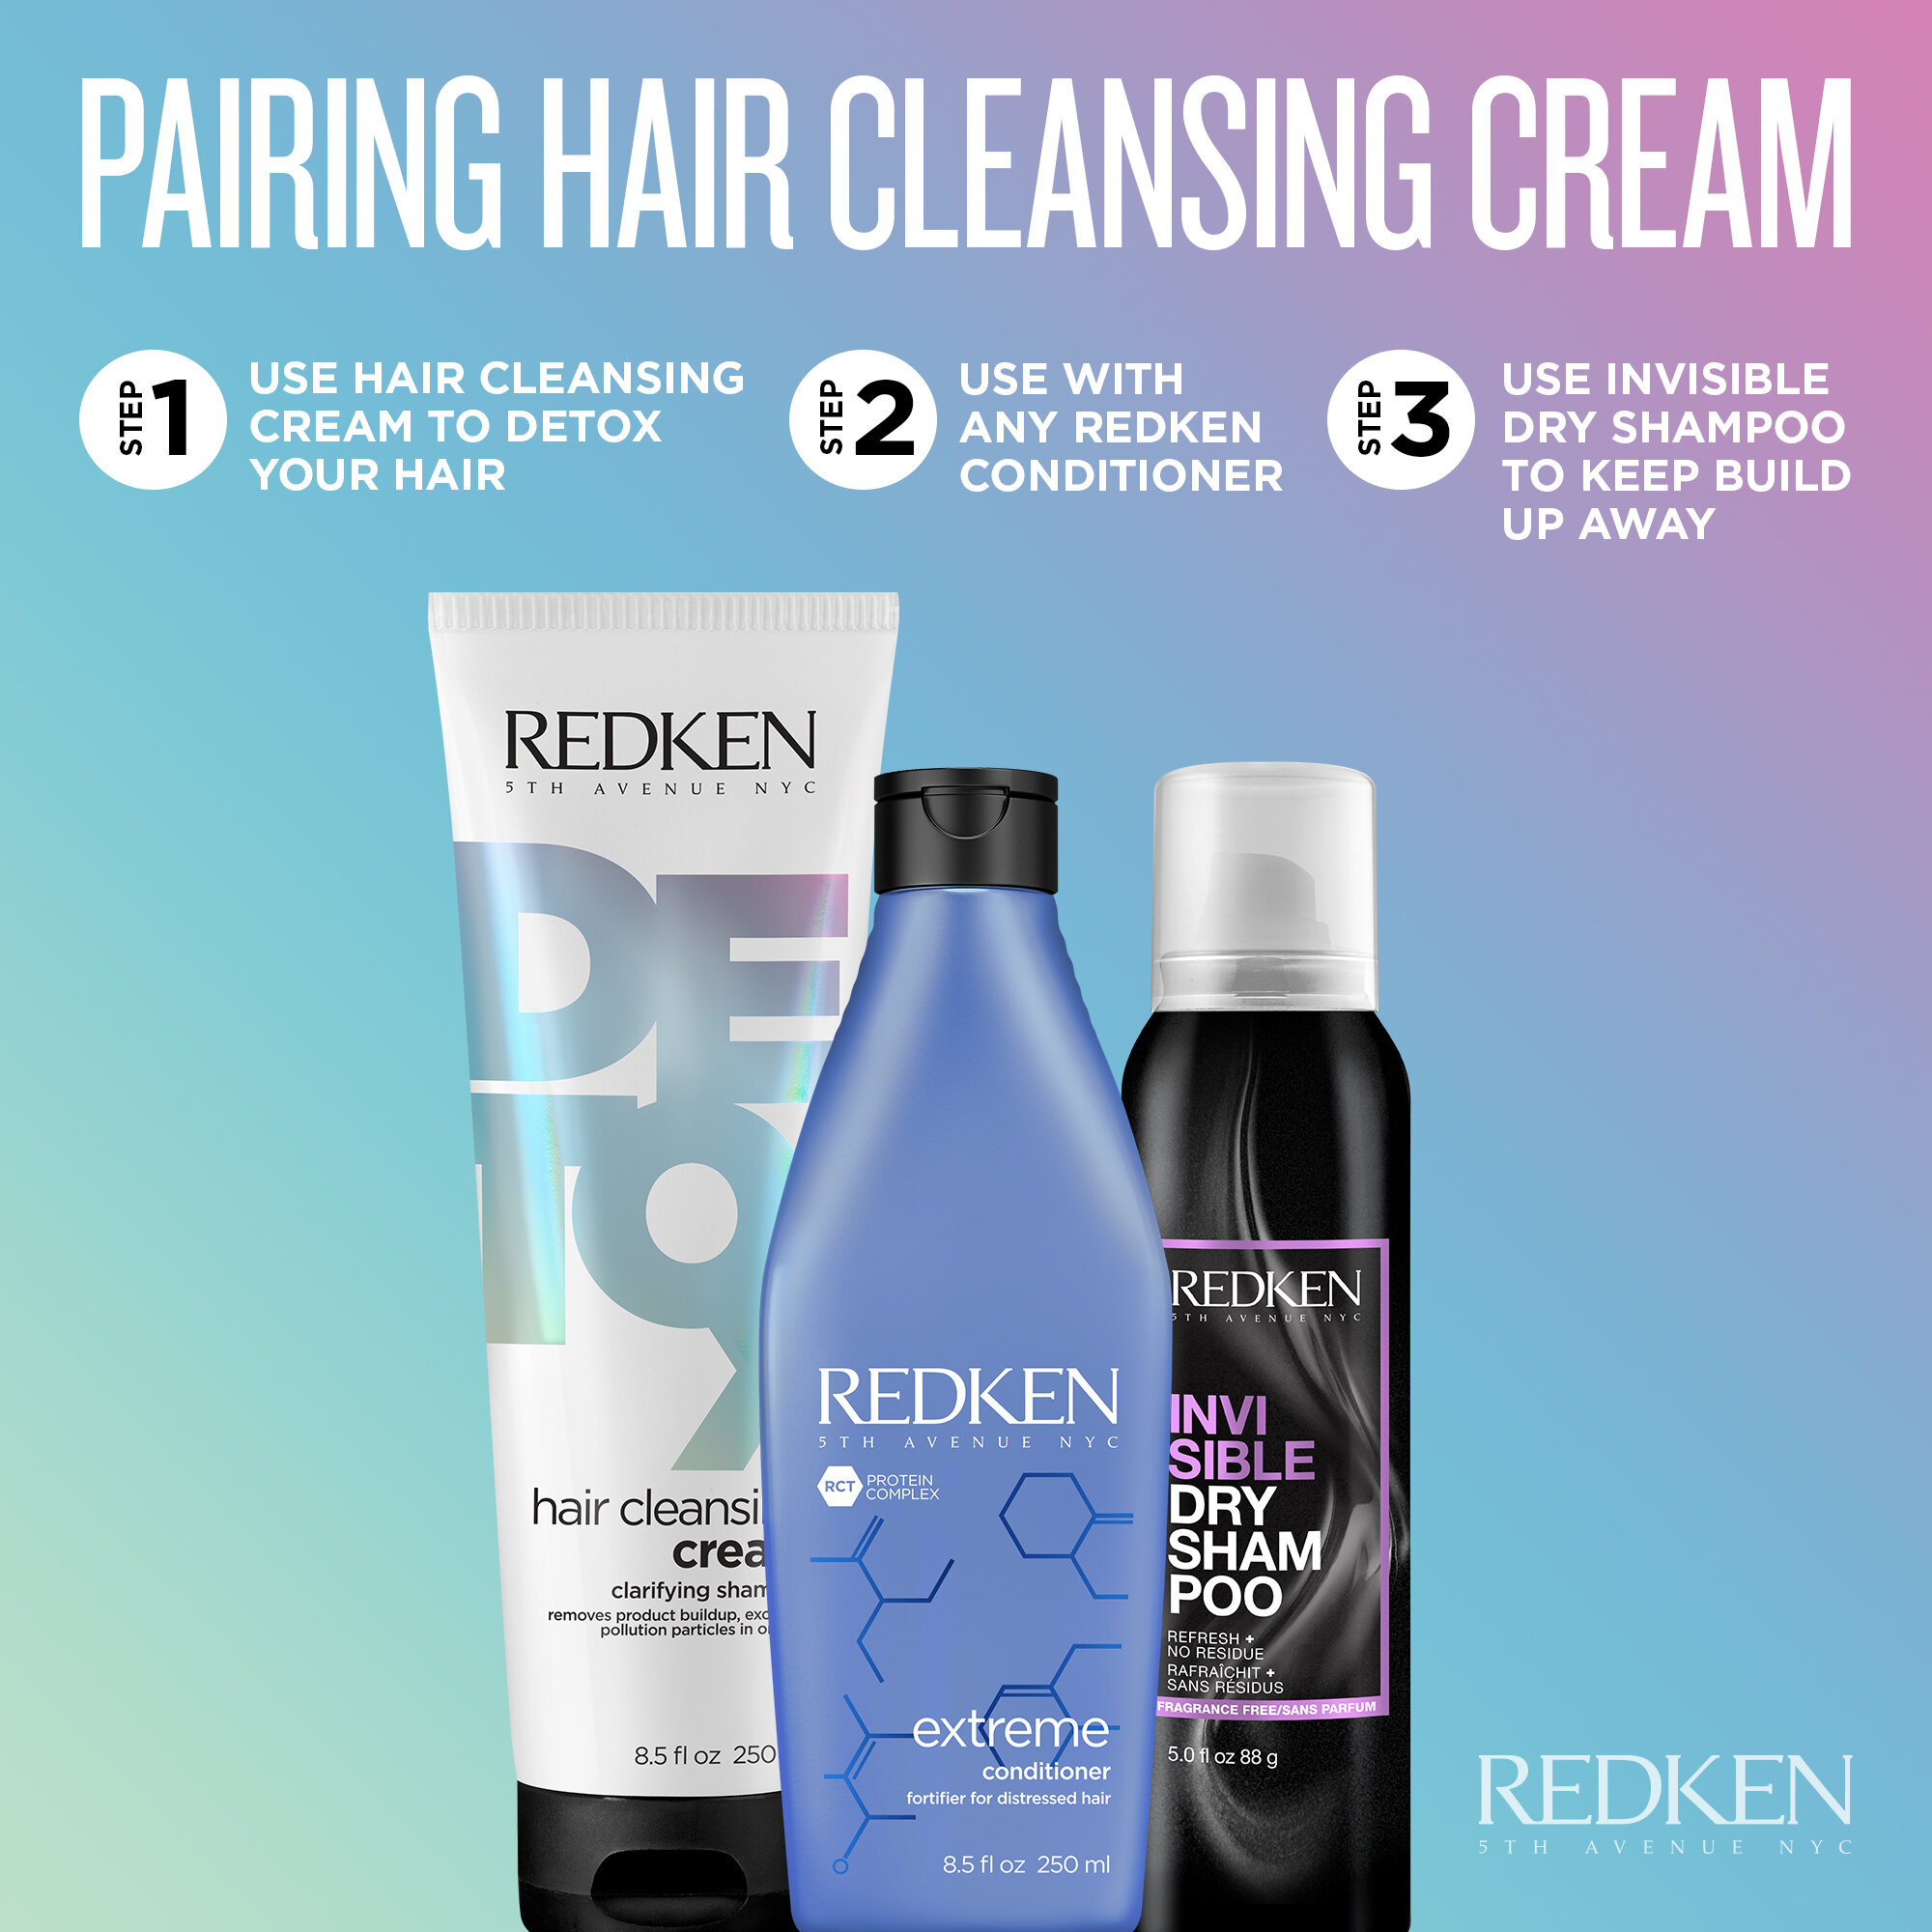 Redken-2020-US-Amazon-Launch-Step-By-Step-Template-V3-2000x2000.jpg